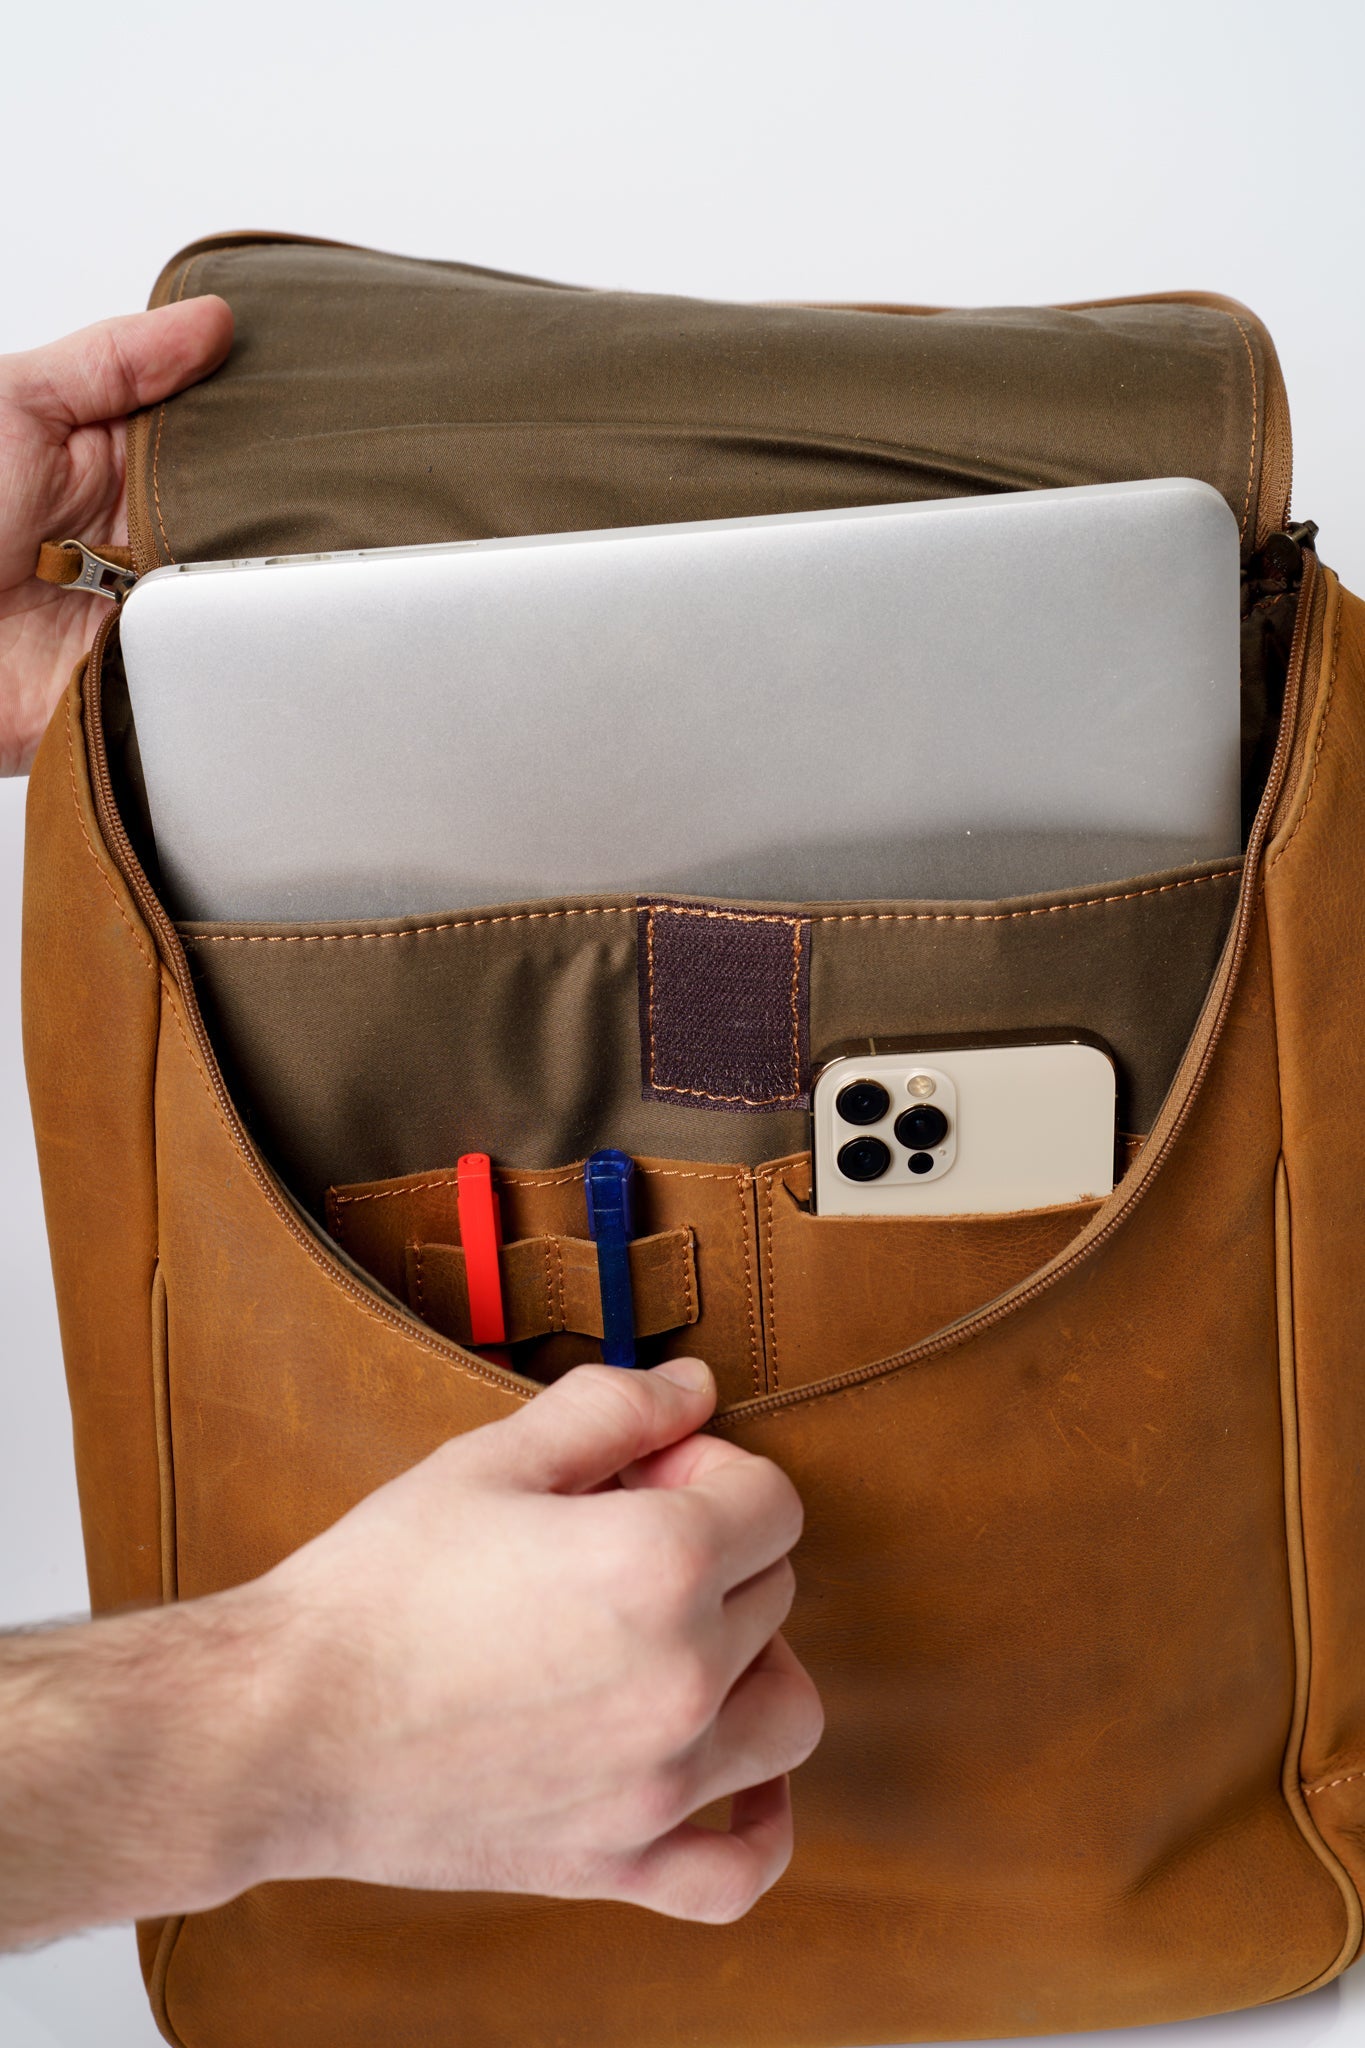 Inner view of Chamra's satchel style backpack. Compartments for laptops, phones, pens, and notebooks can be seen.